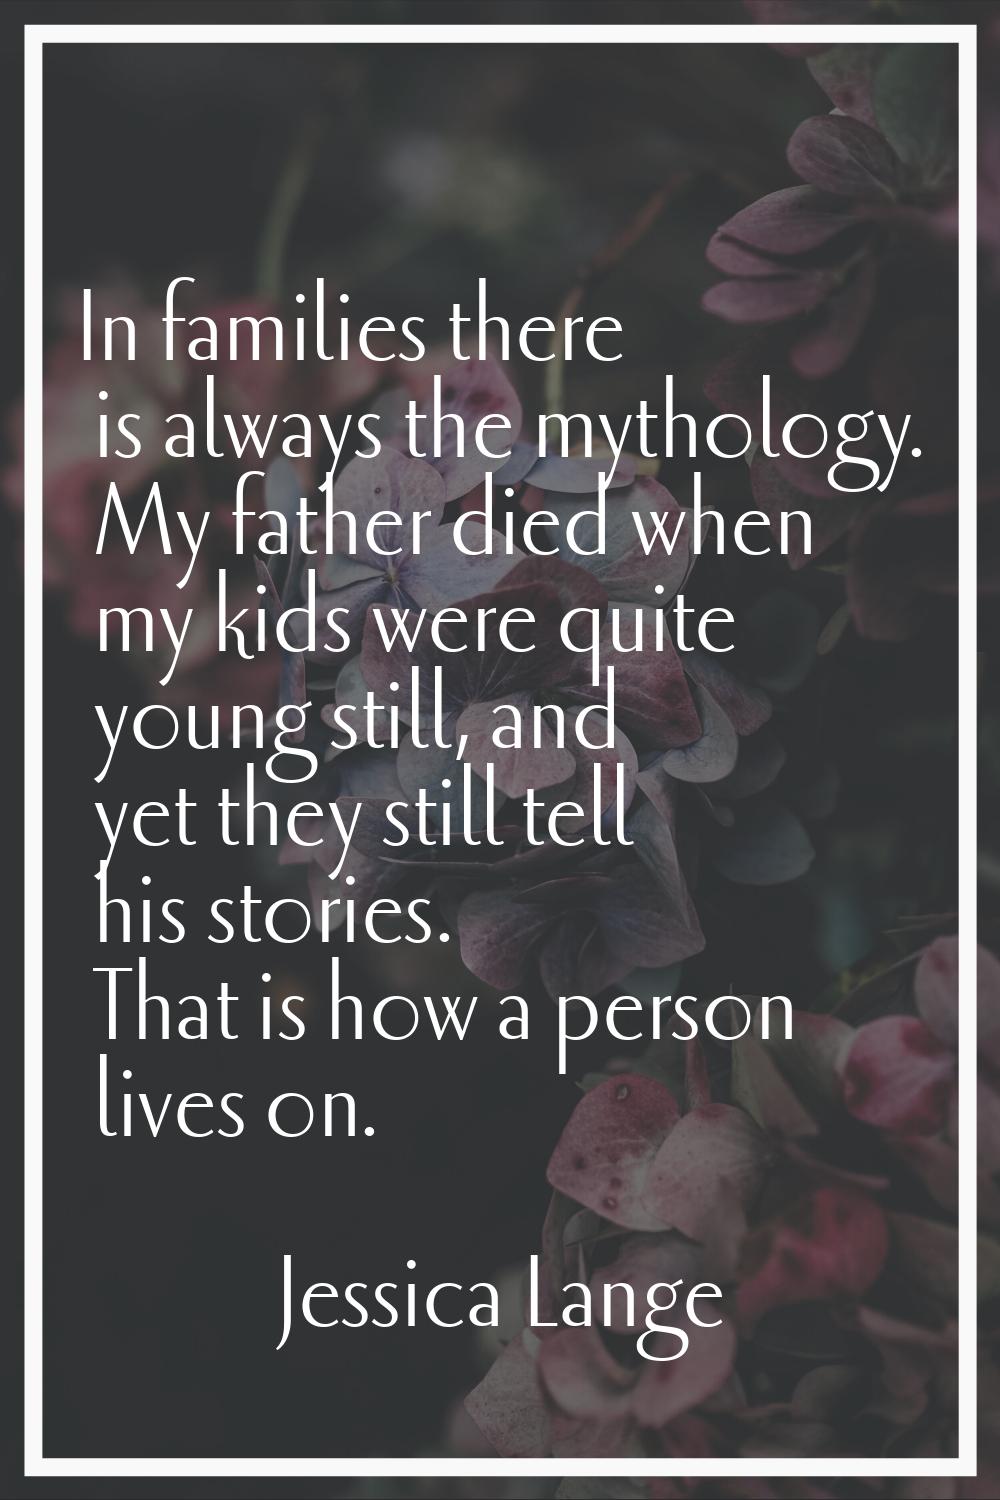 In families there is always the mythology. My father died when my kids were quite young still, and 